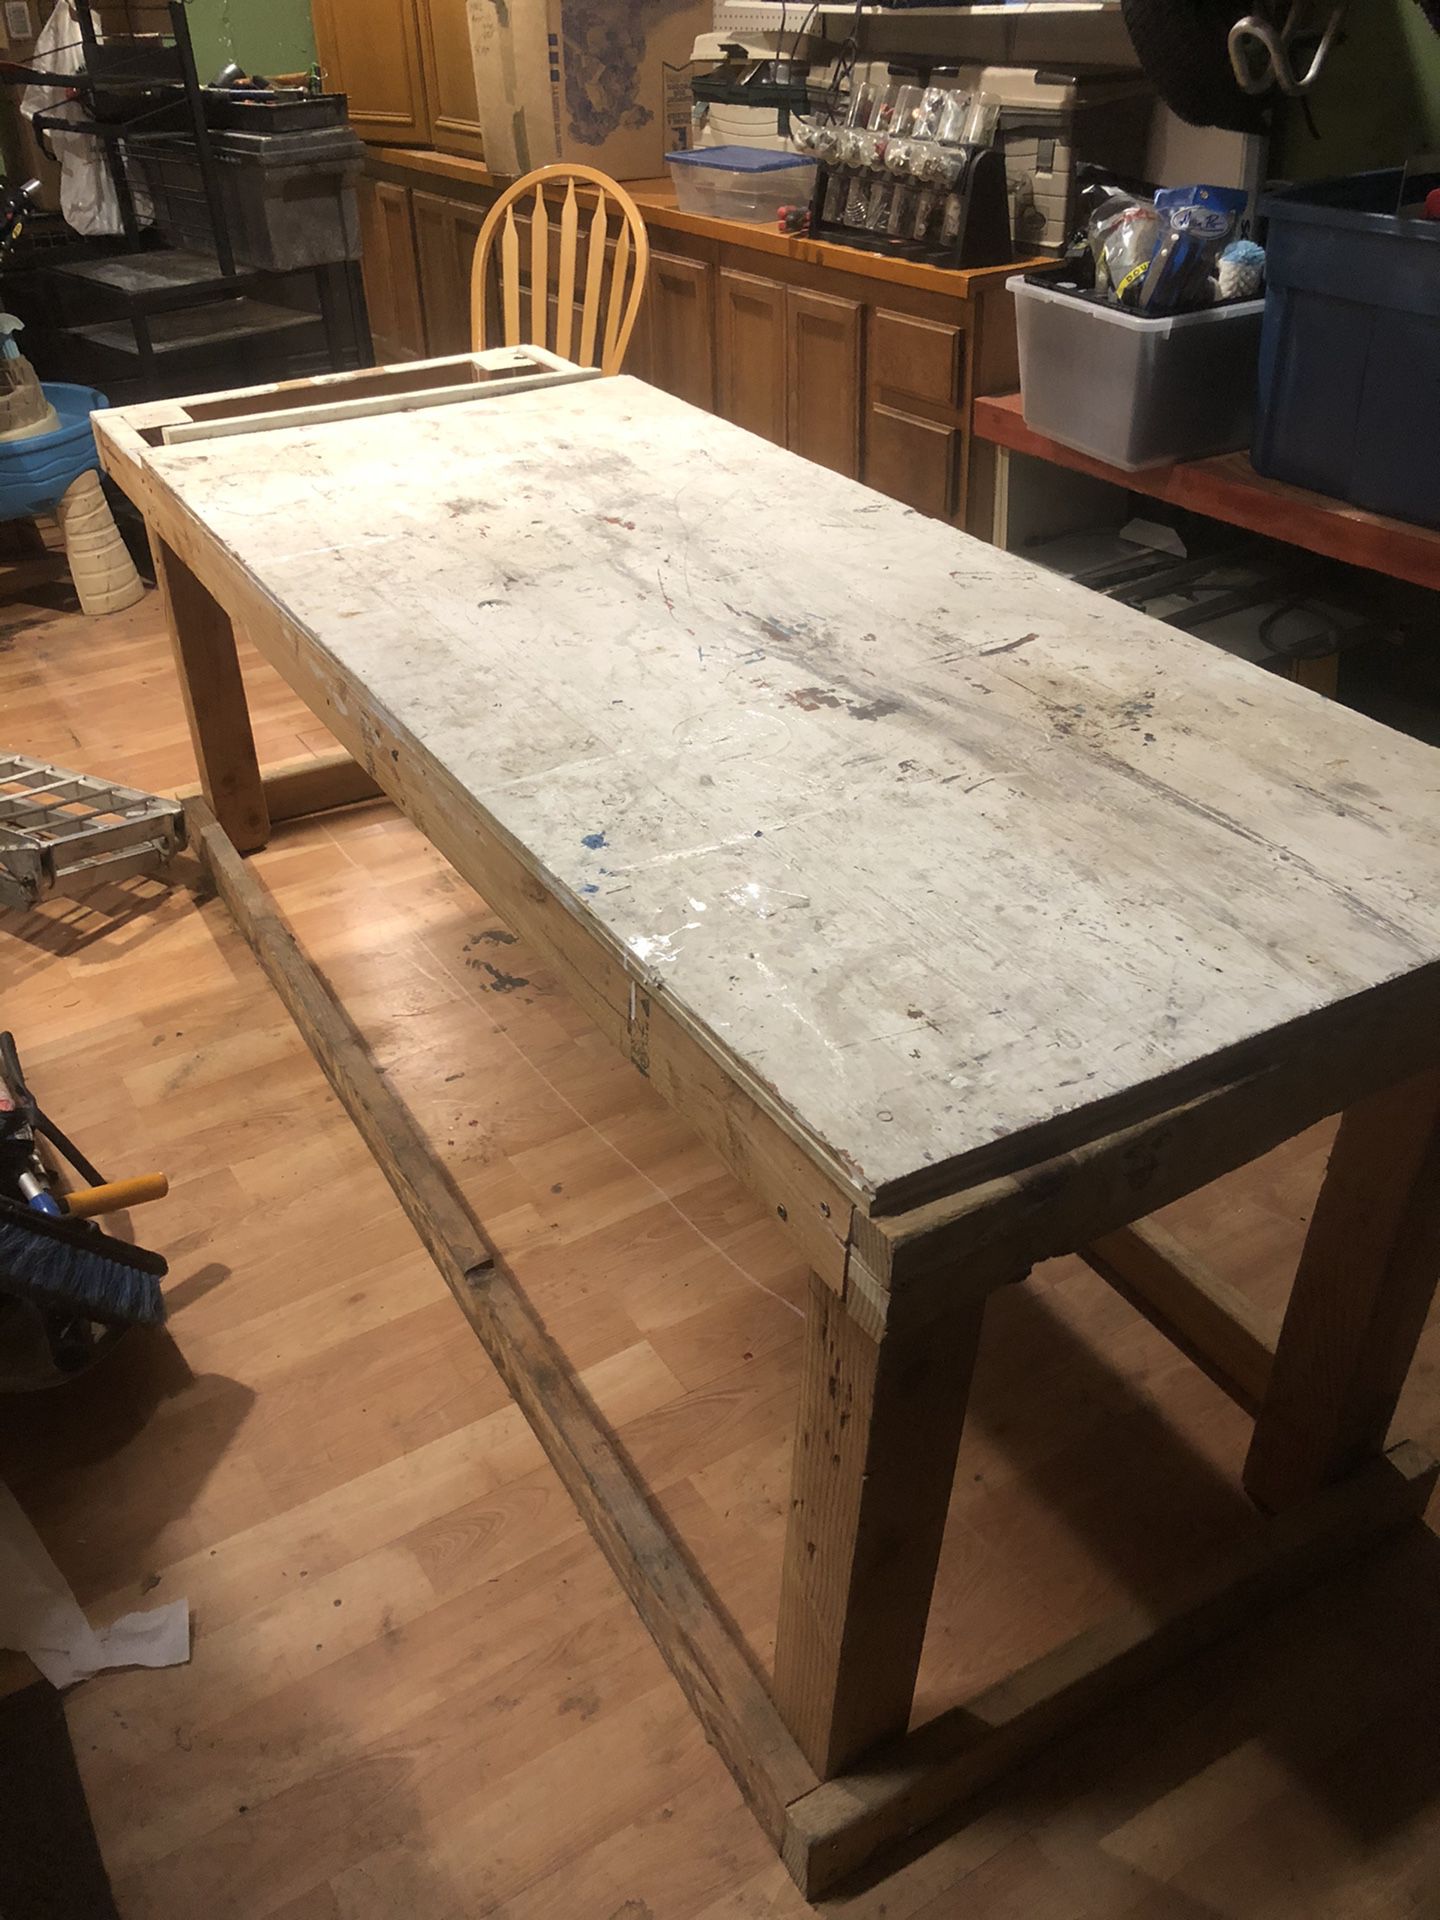 Free work bench/ motorcycle stand